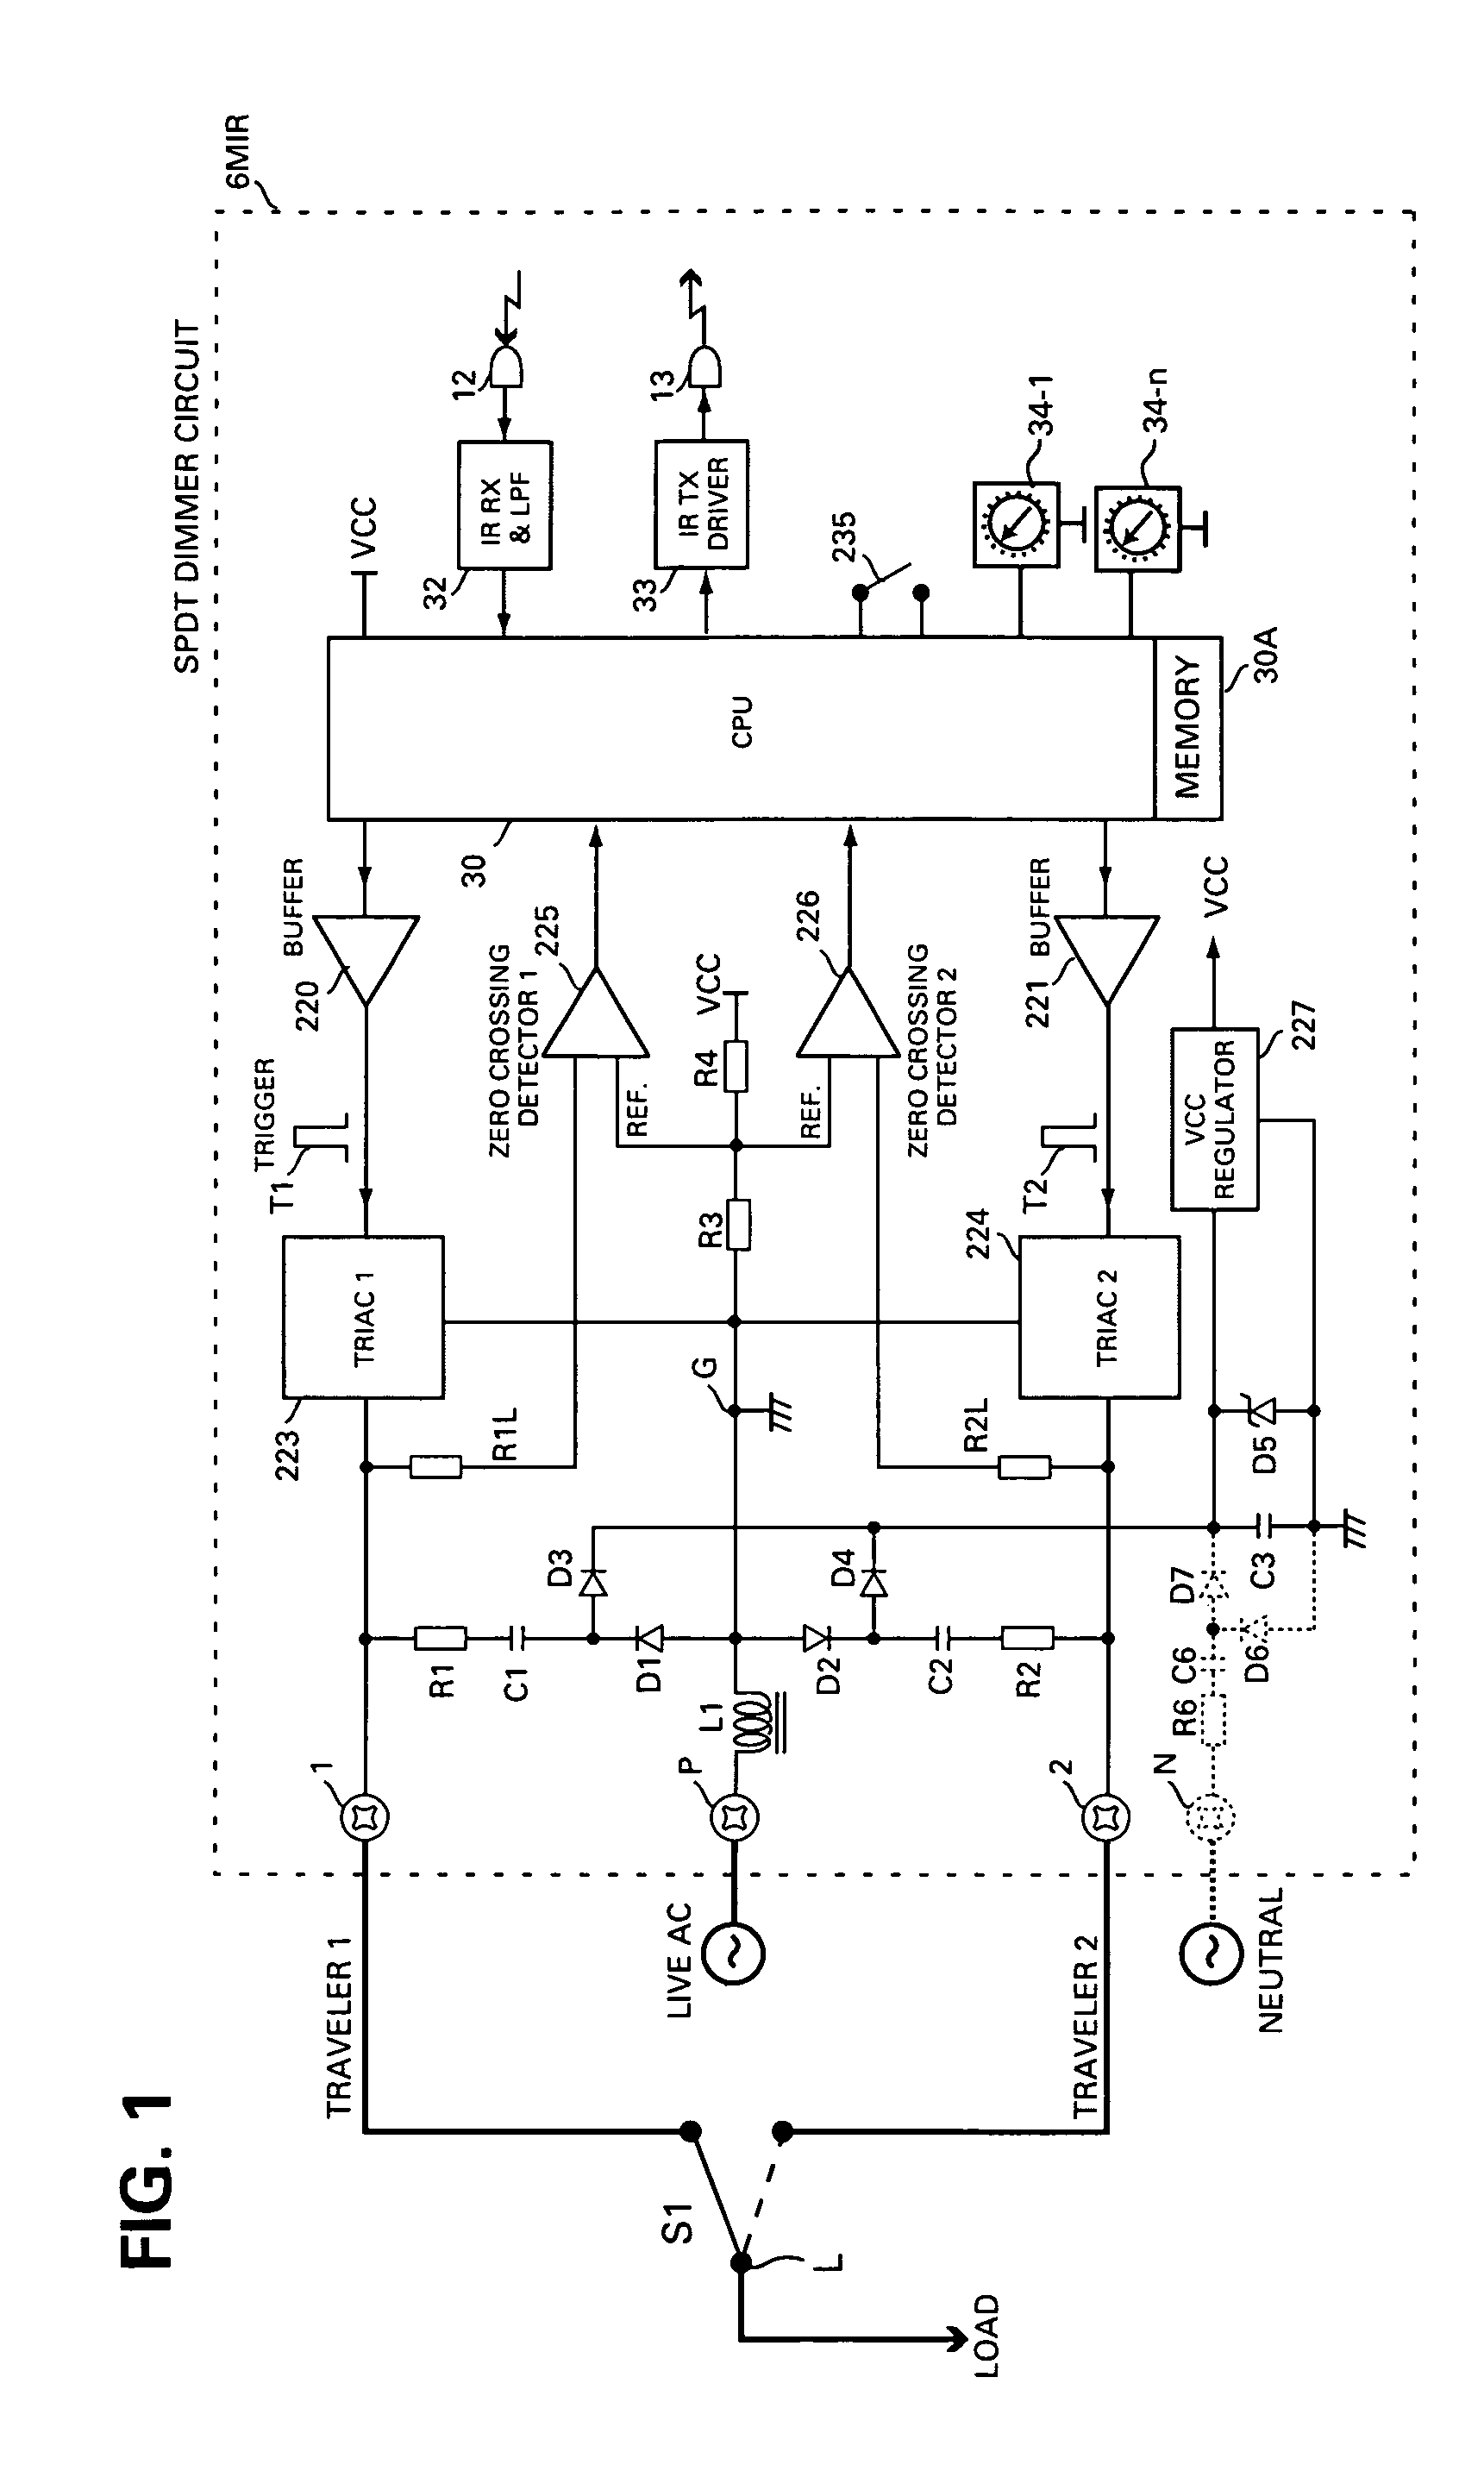 Method and apparatus for connecting AC powered switches, current sensors and control devices via two way IR, fiber optic and light guide cables